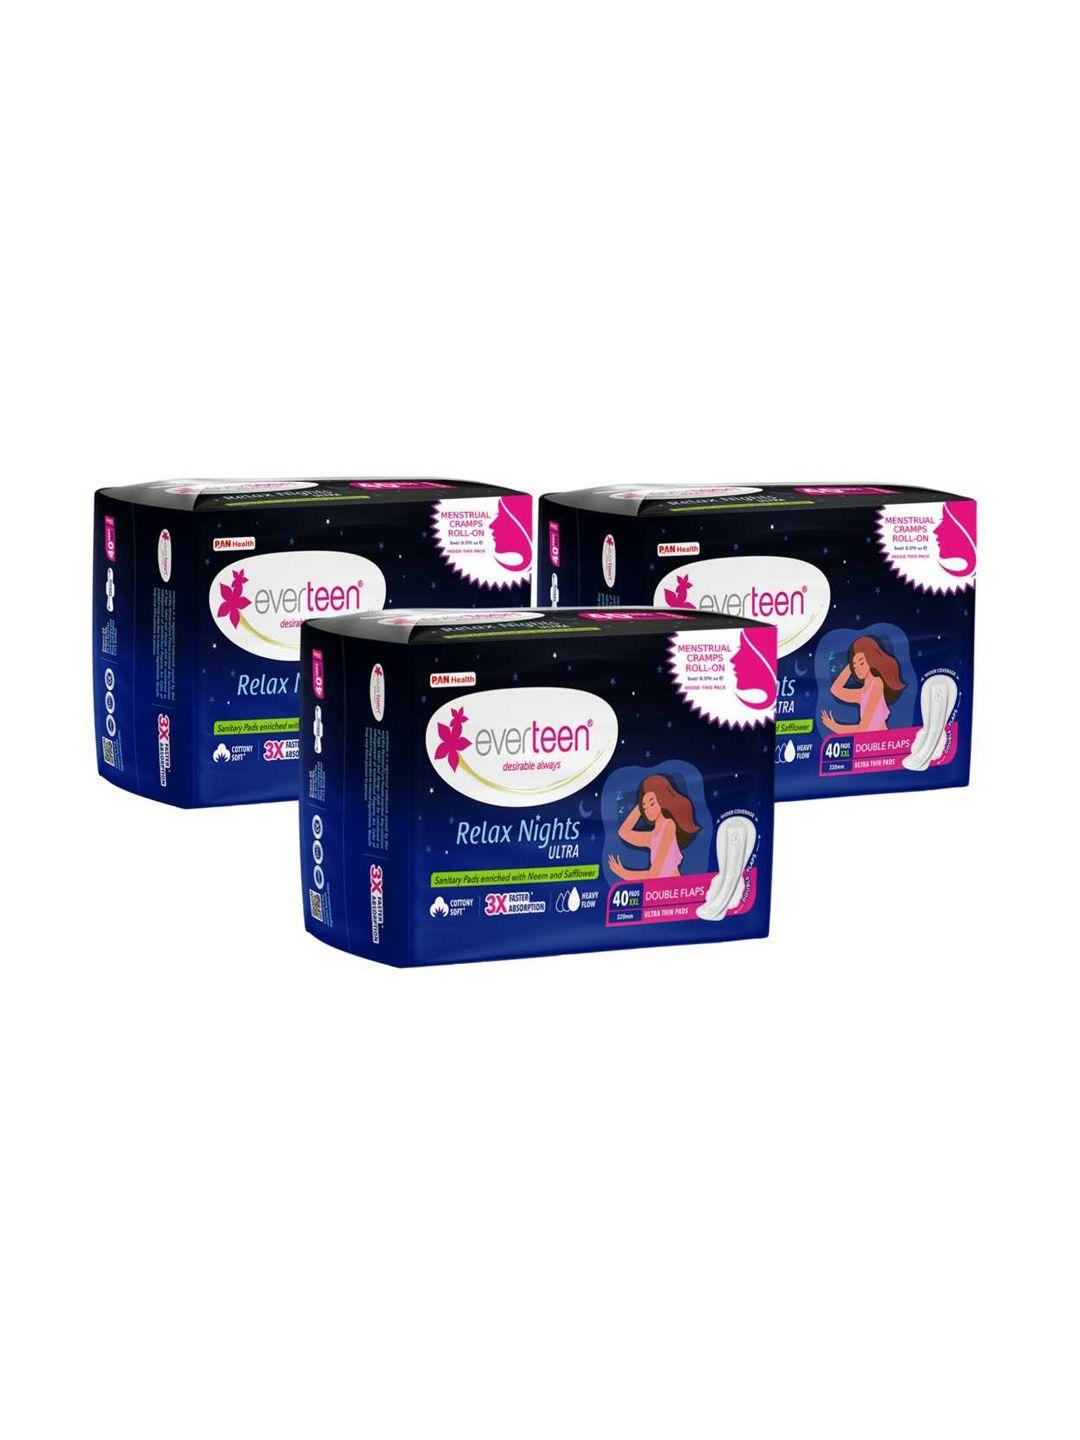 everteen set of 3 relax nights ultra sanitary pads xxl with cramps roll on - 40 pads each